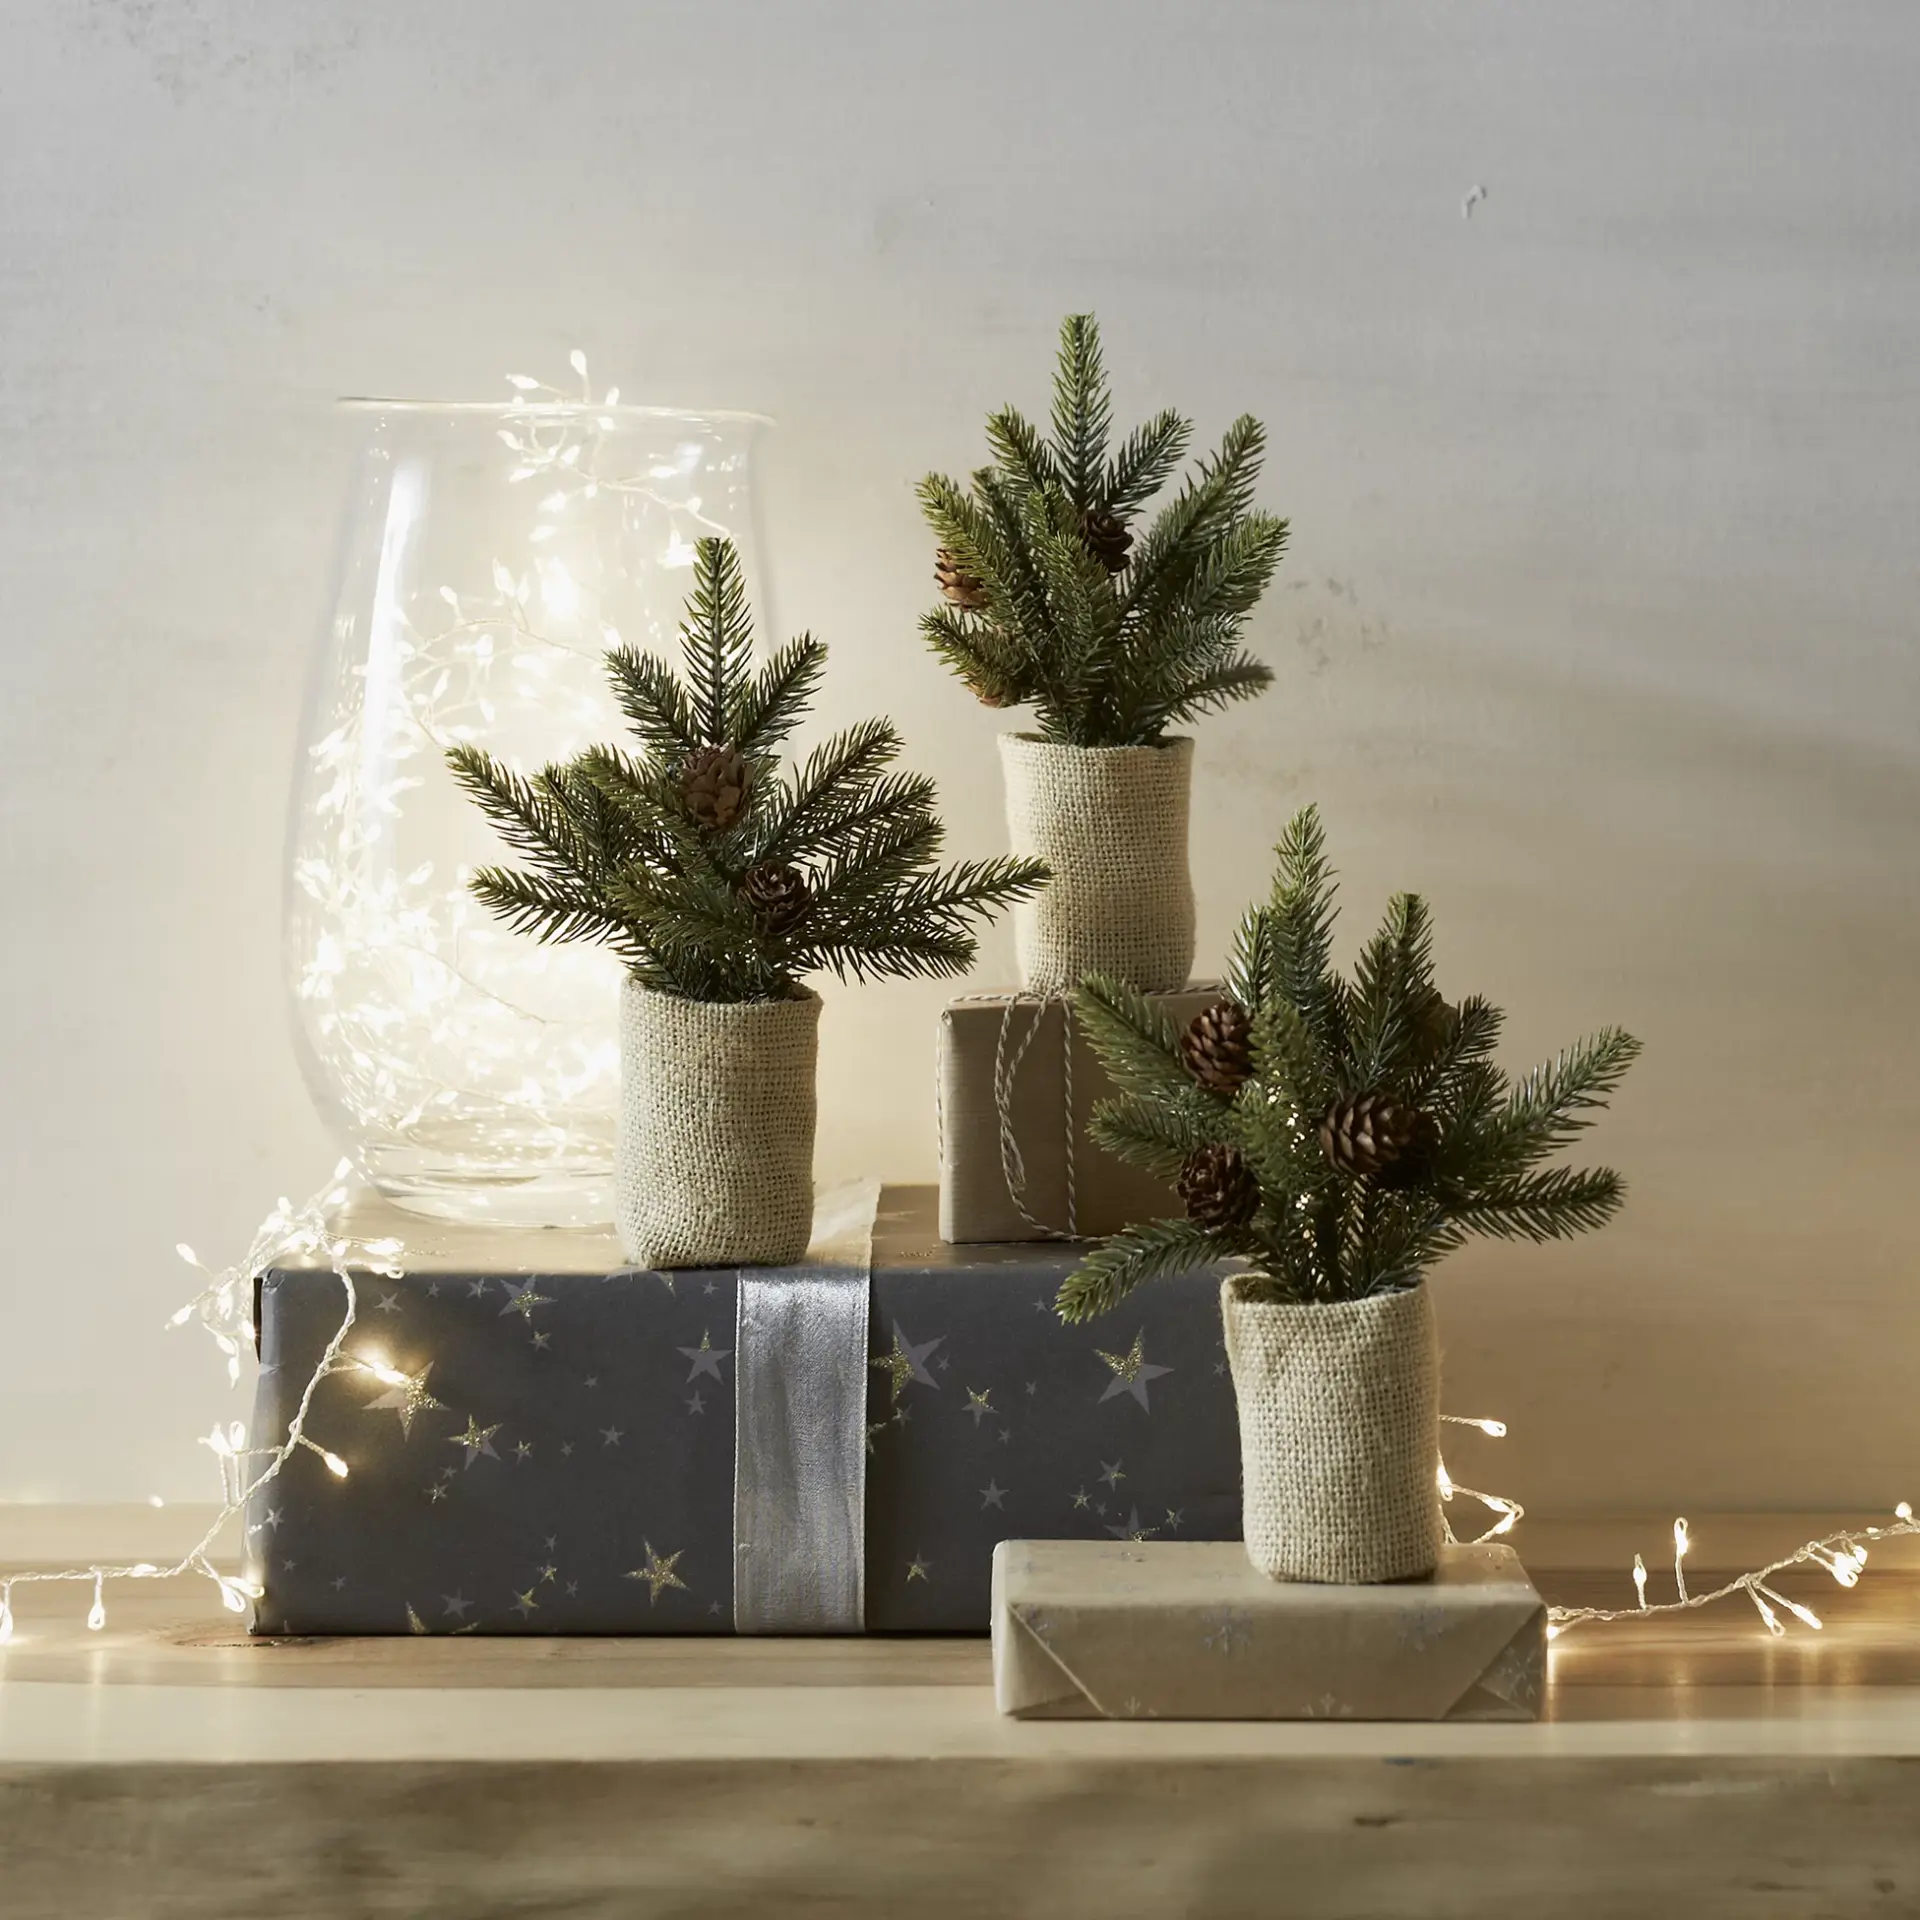 Set of 3 mini Christmas trees from The White Company London.